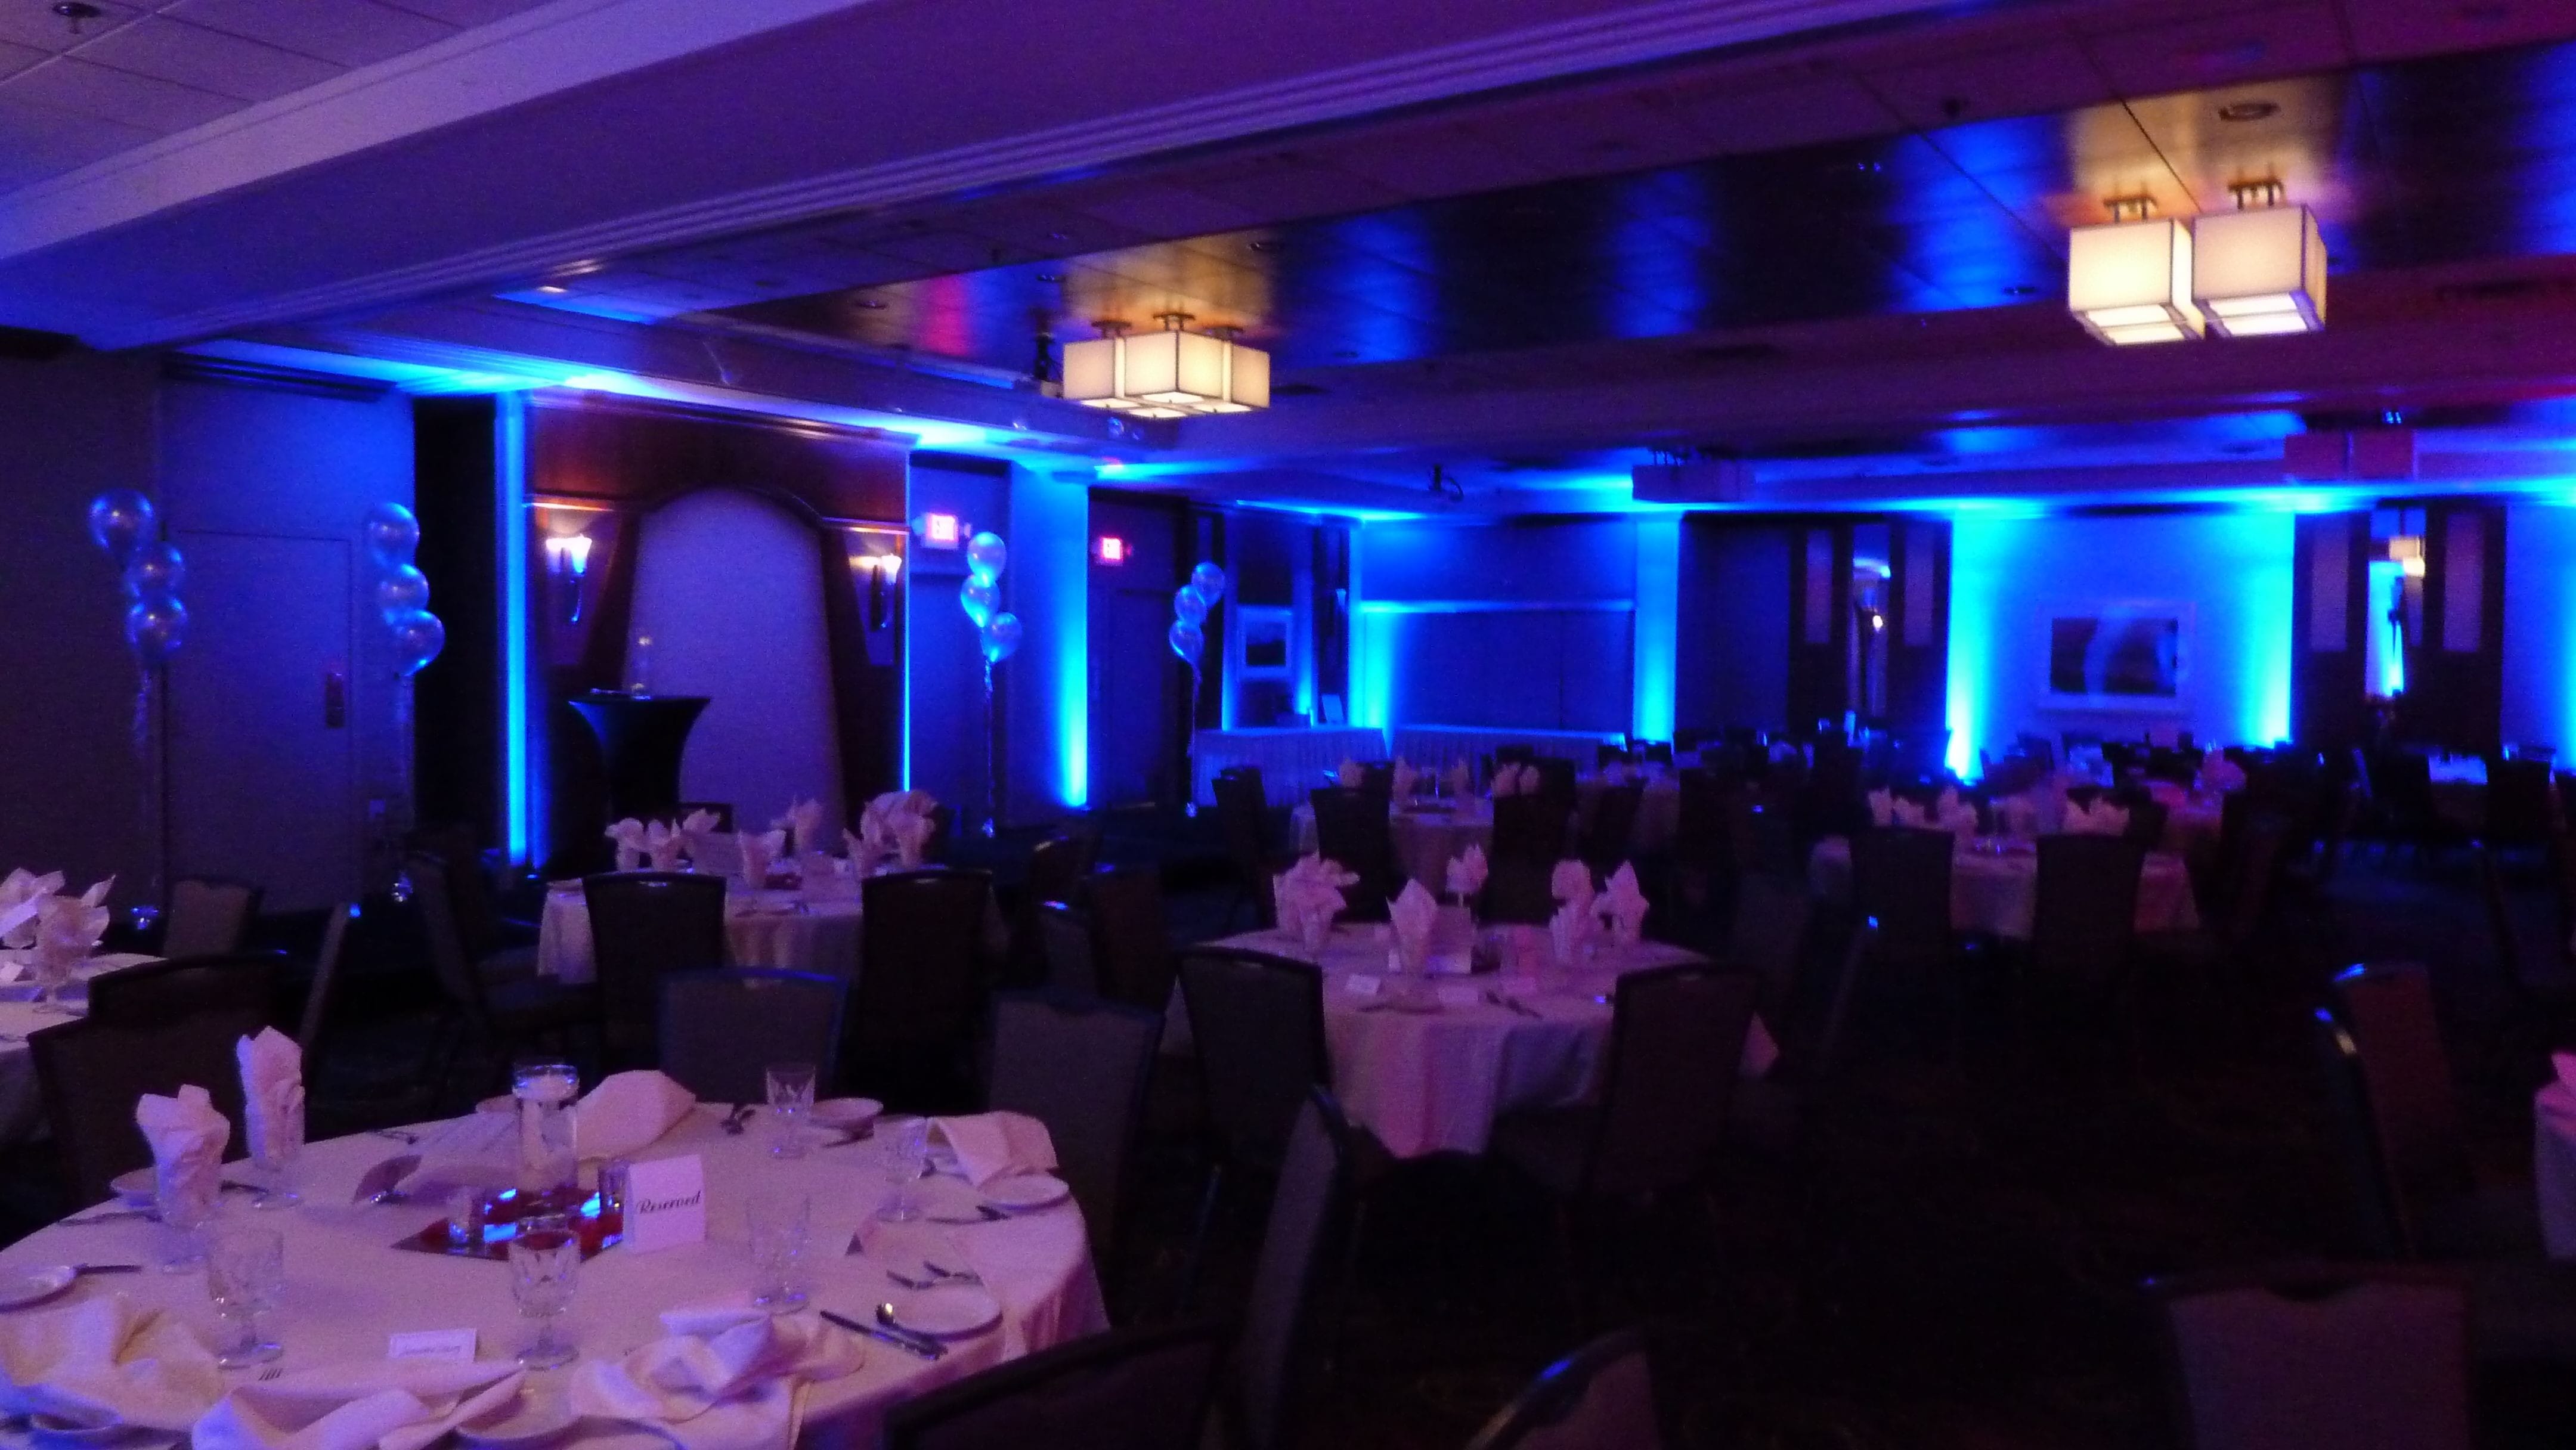 Holiday Inn, Duluth
Great Lakes Ballroom with blue up lighting for a wedding.